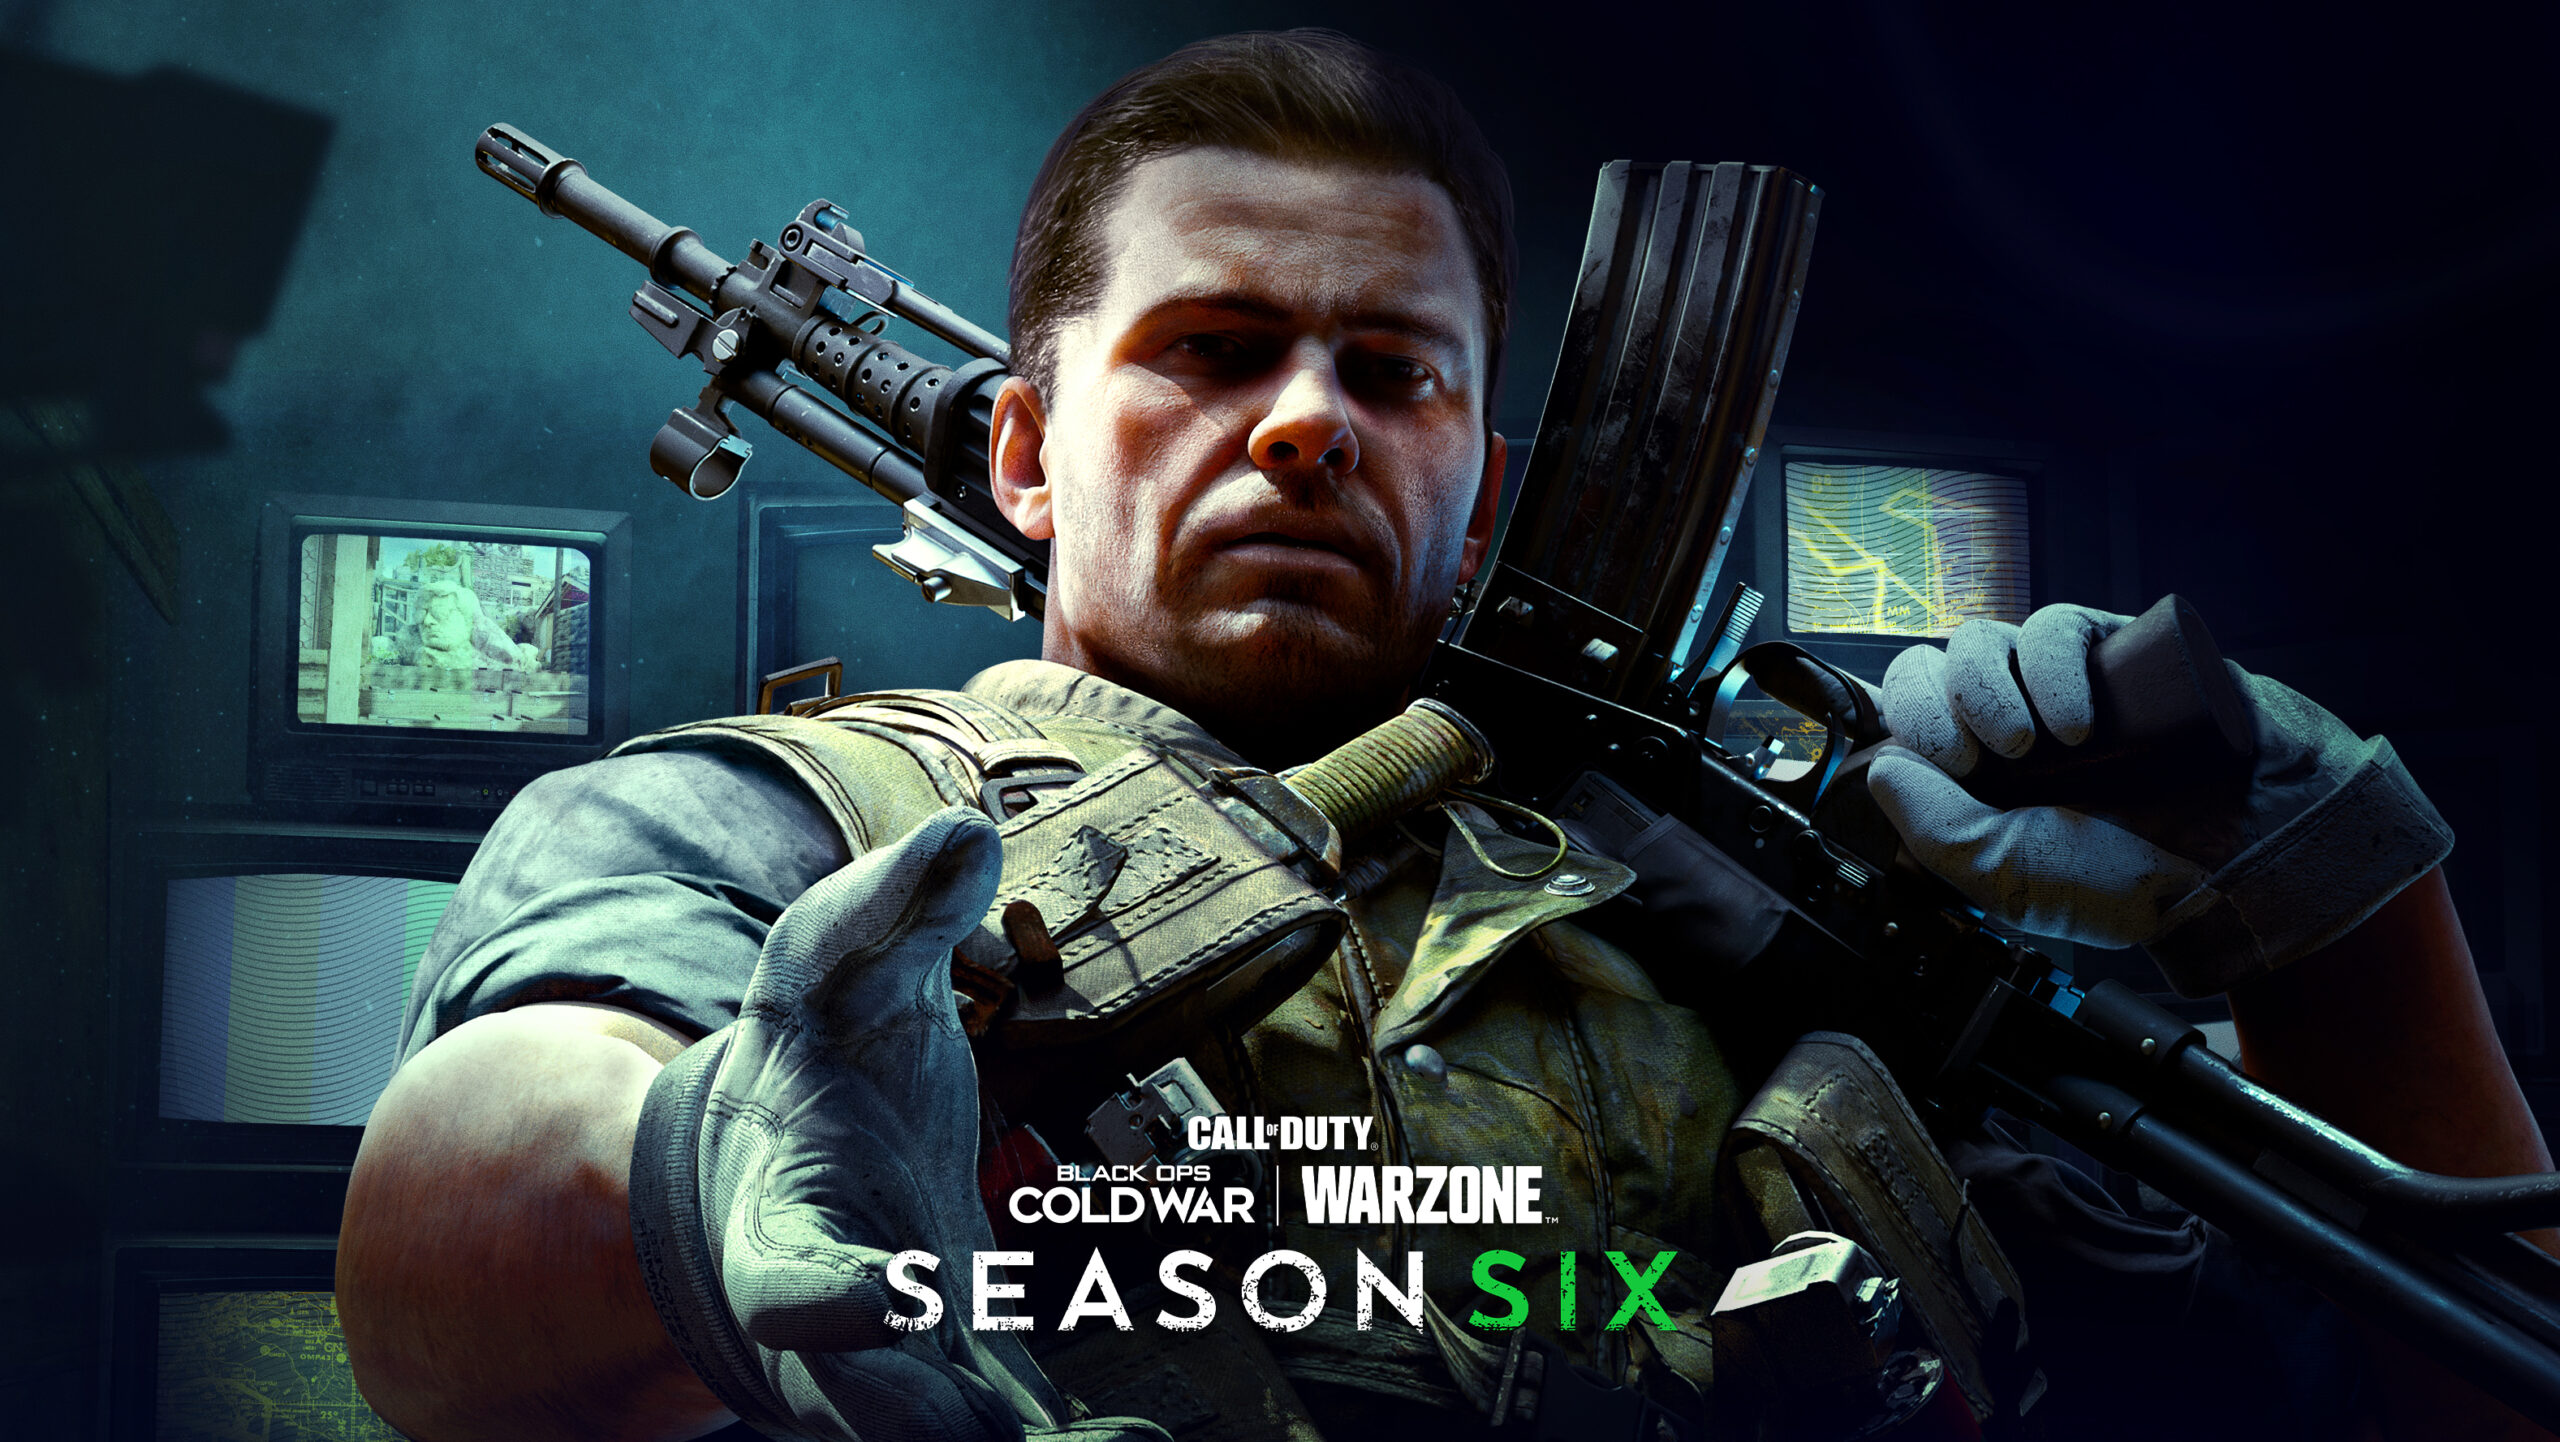 Season Six of Call of Duty: Black Ops Cold War and Warzone launches October 7